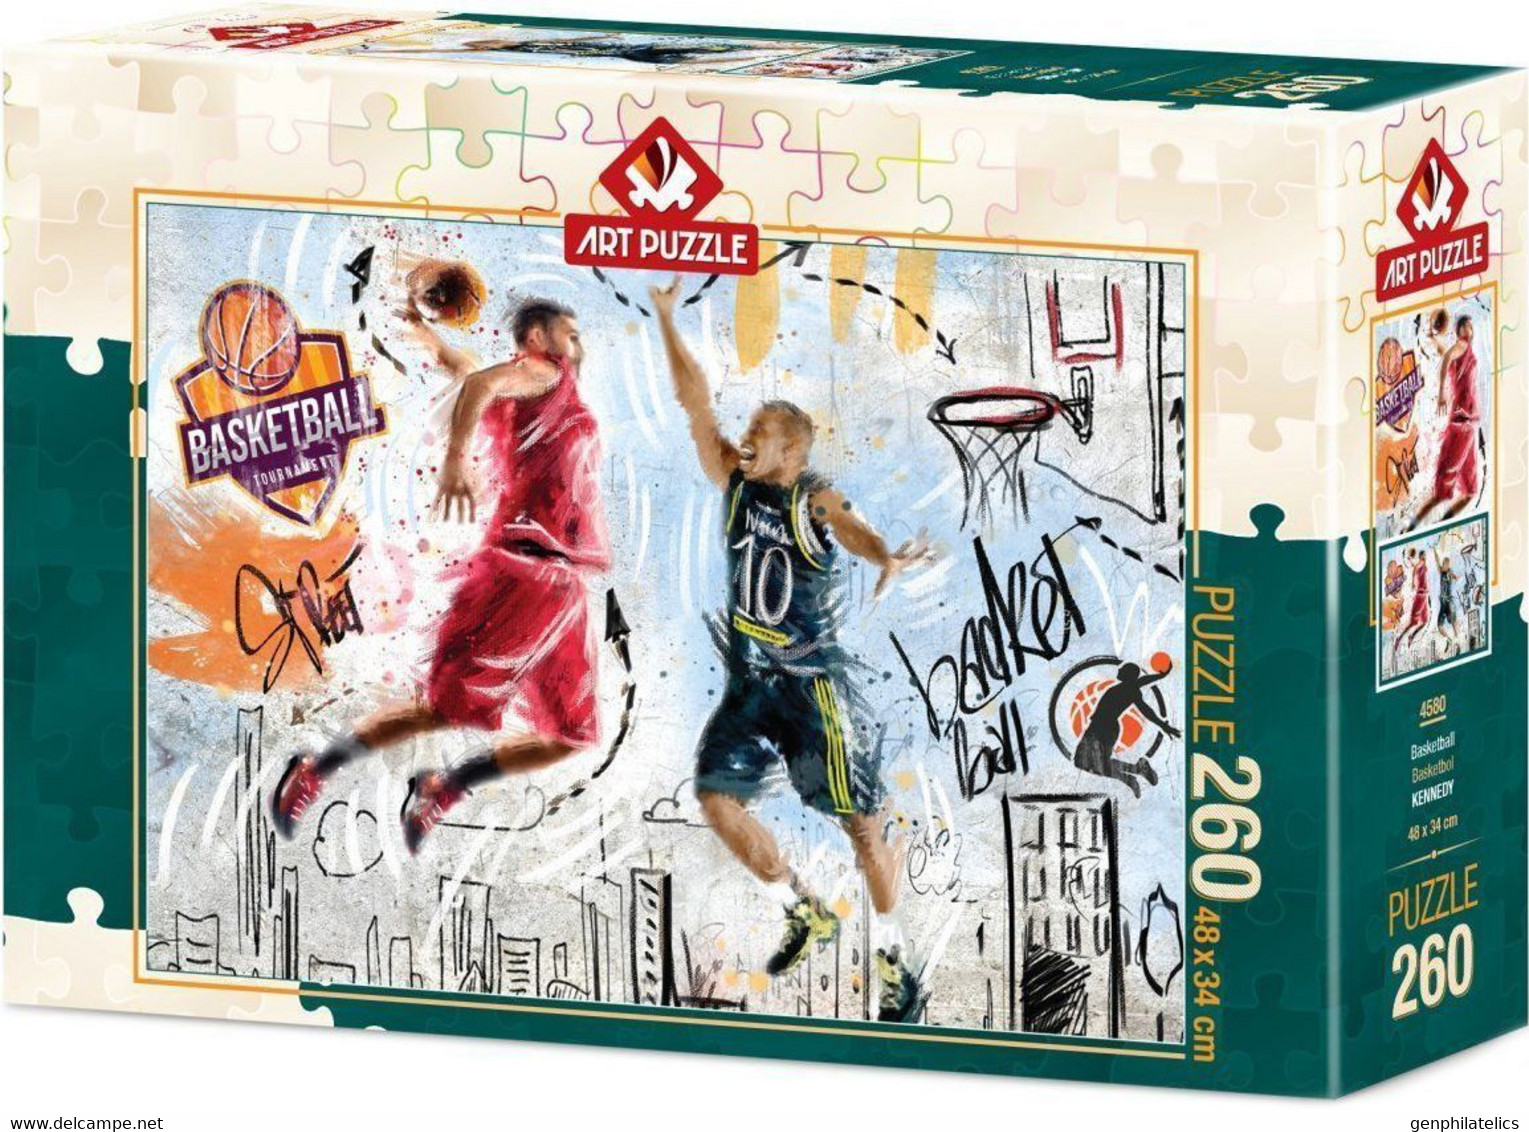 NEW Art Puzzle Jigsaw Puzzle 260 Tiles Pieces "Basketball" - Puzzle Games